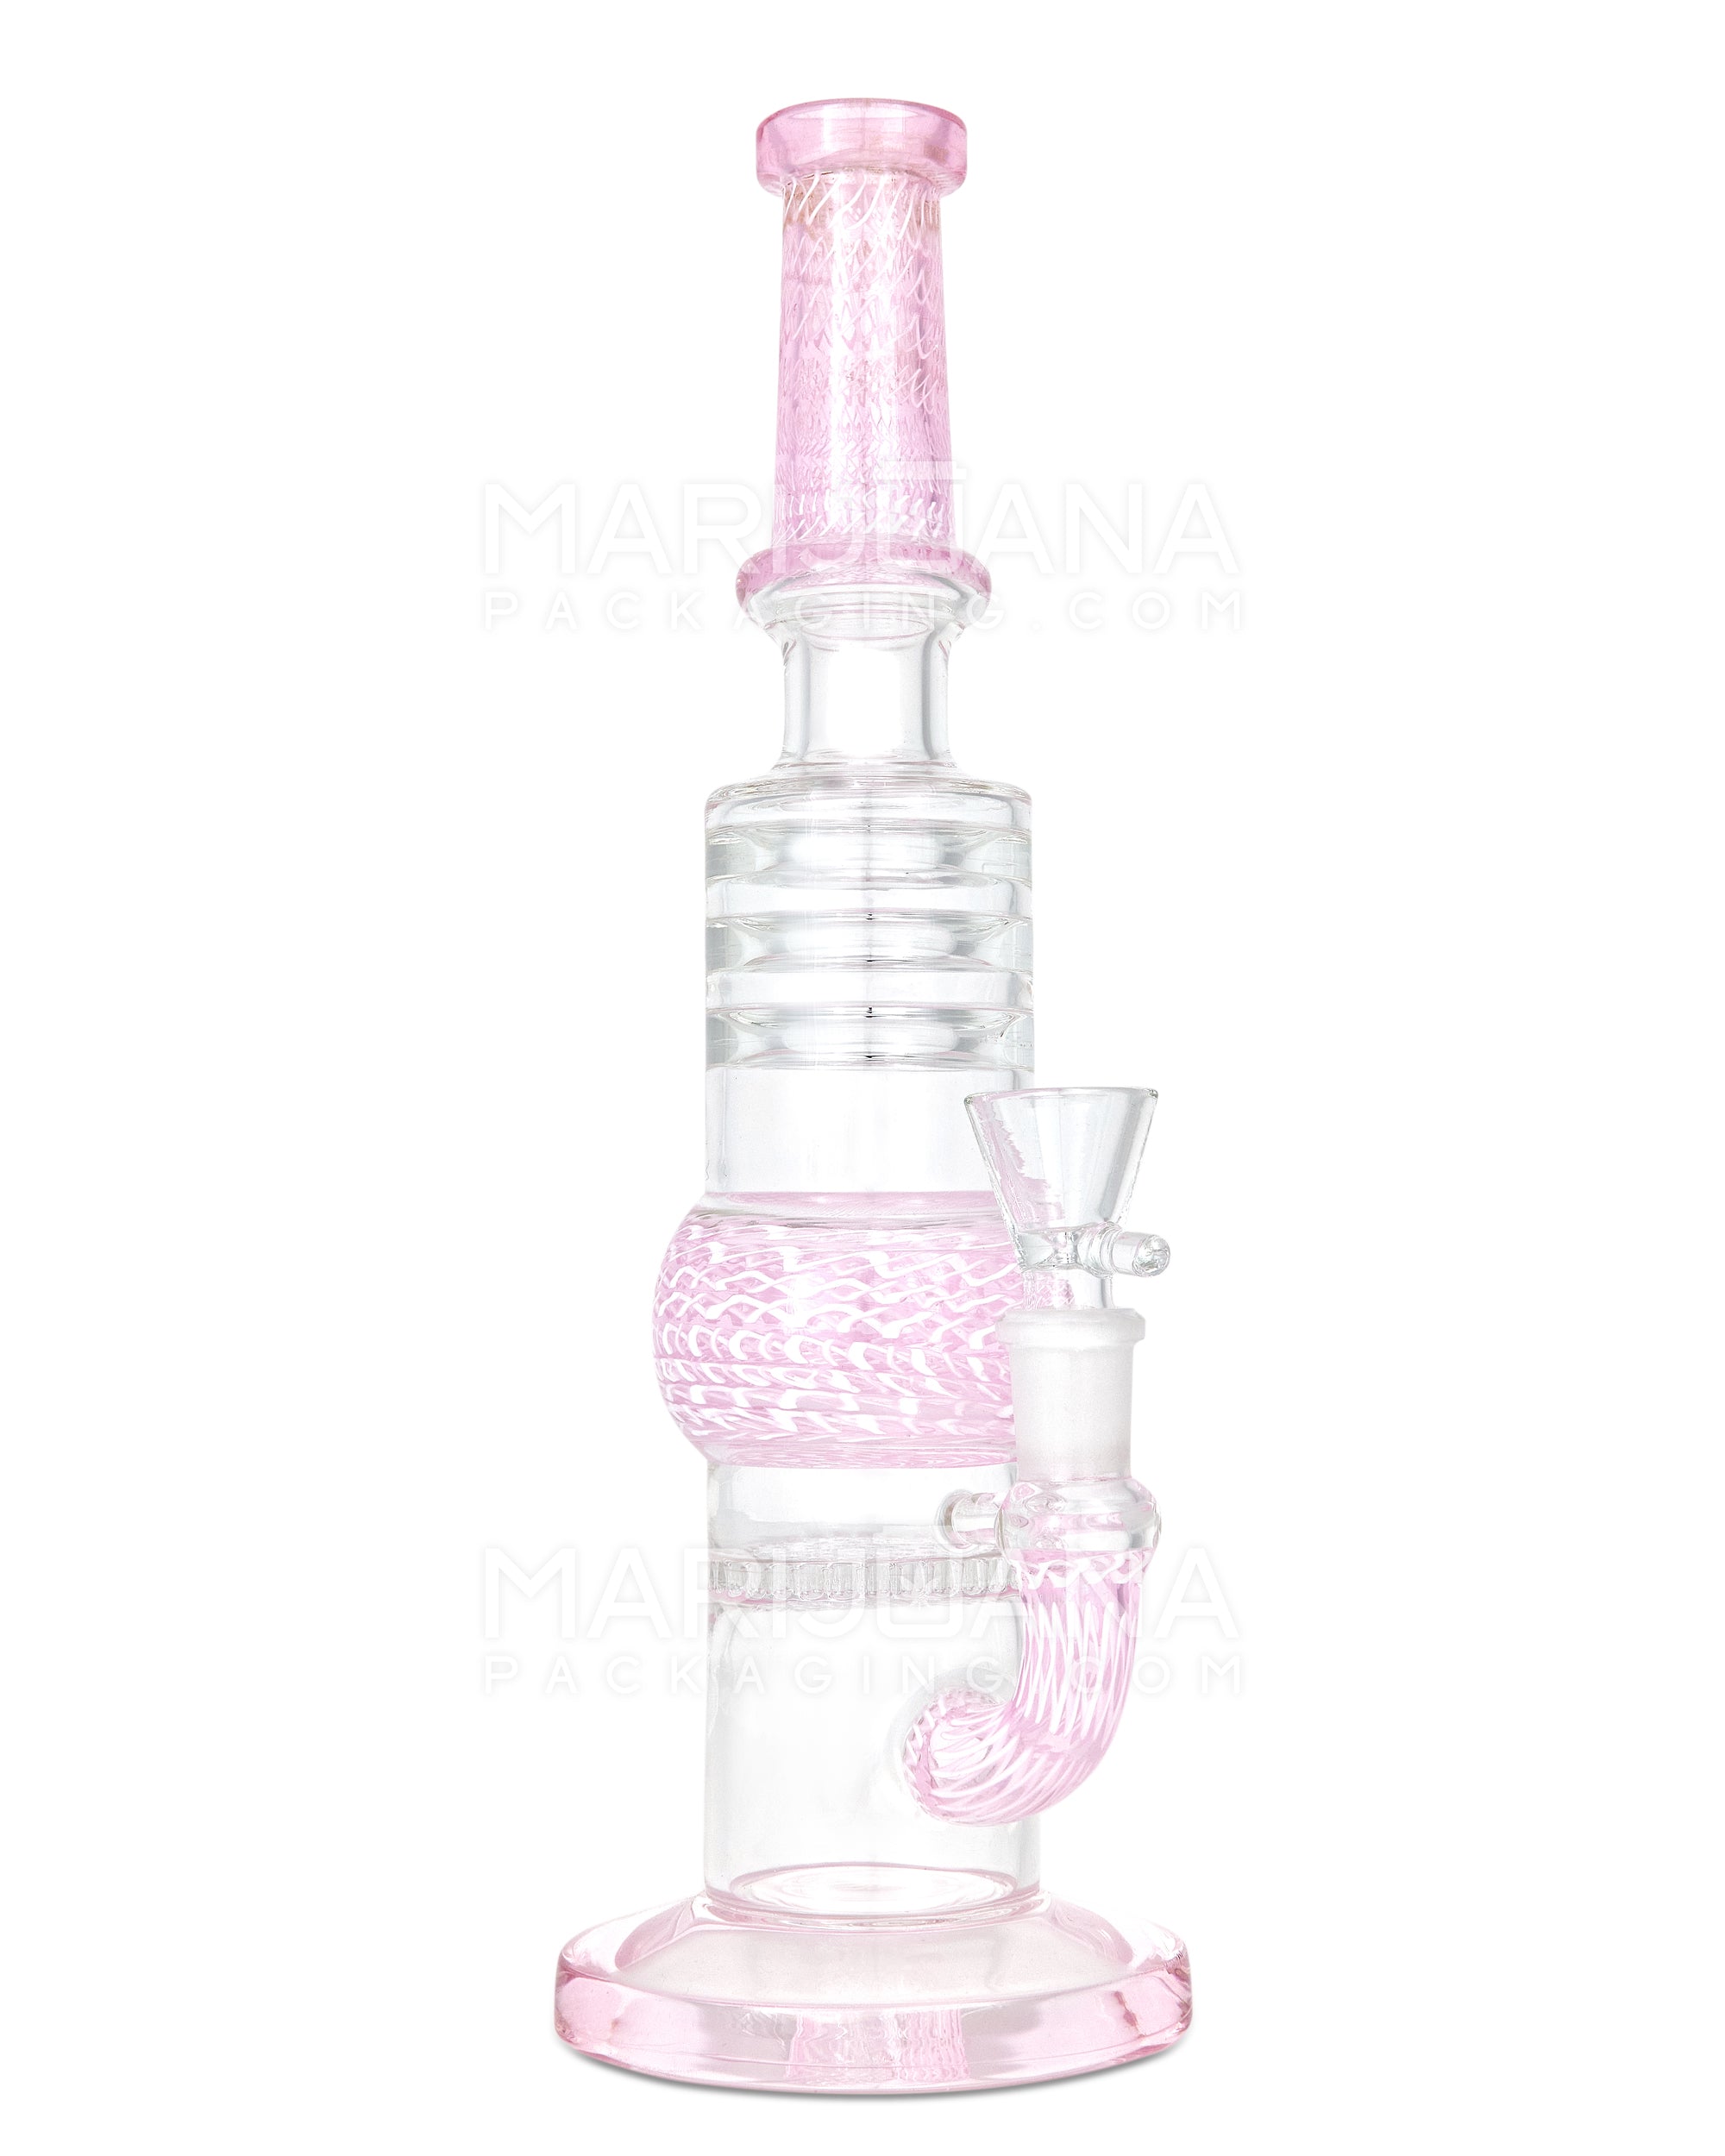 Straight Neck Honeycomb Perc Zanfirico Glass Water Pipe w/ Ice Catcher | 11in Tall - 14mm Bowl - Pink - 7